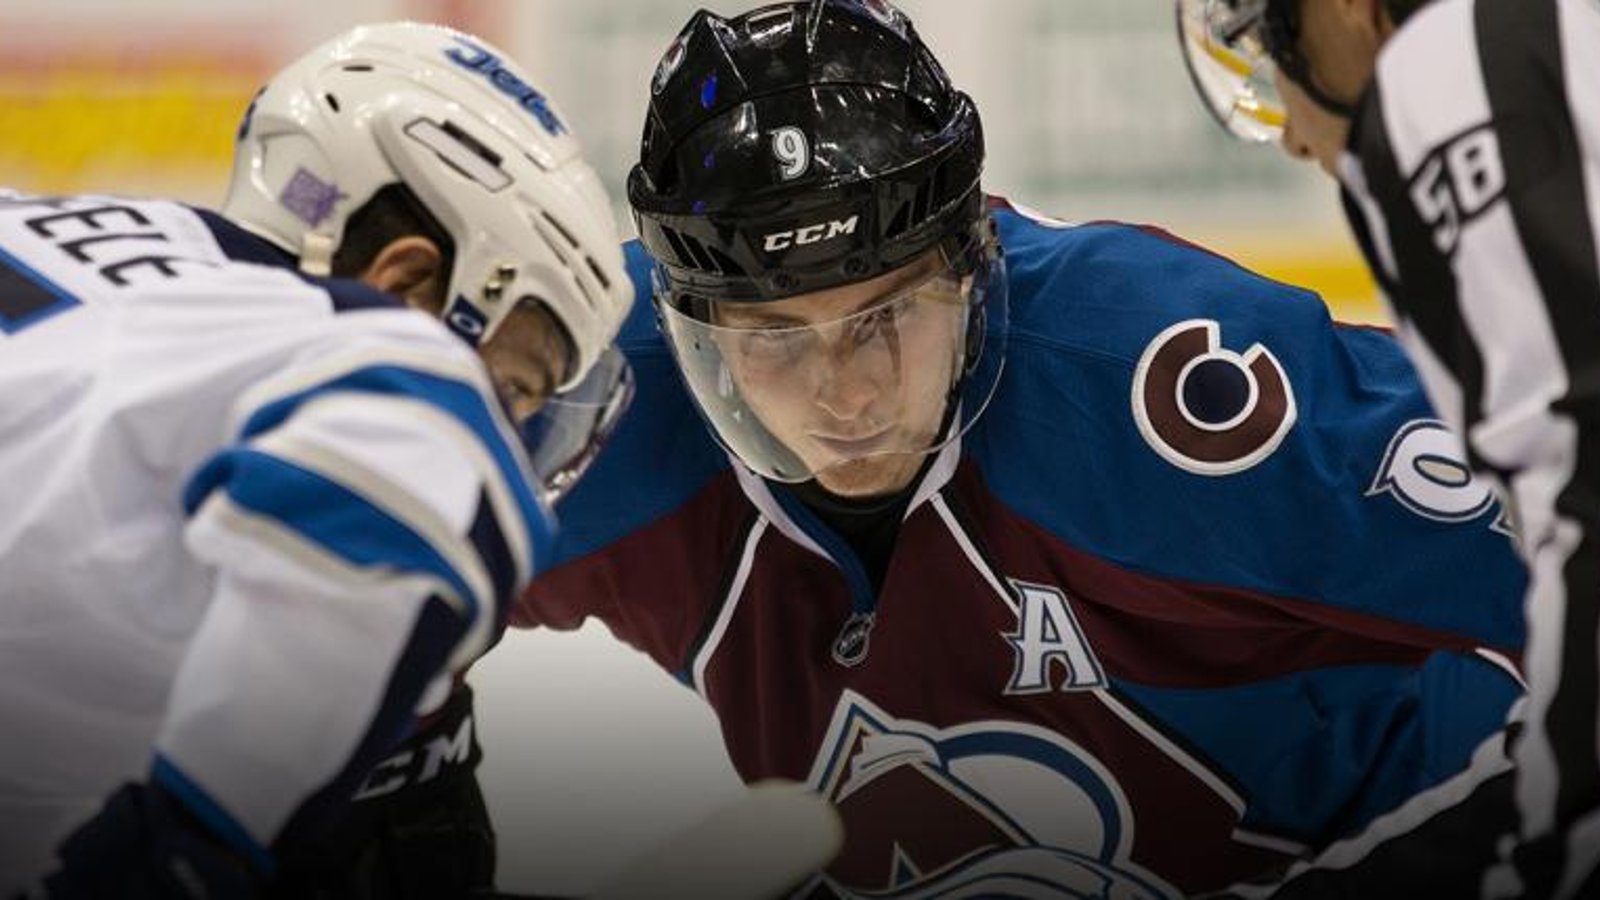 Hockey Insider believes Duchene will be traded any day now.